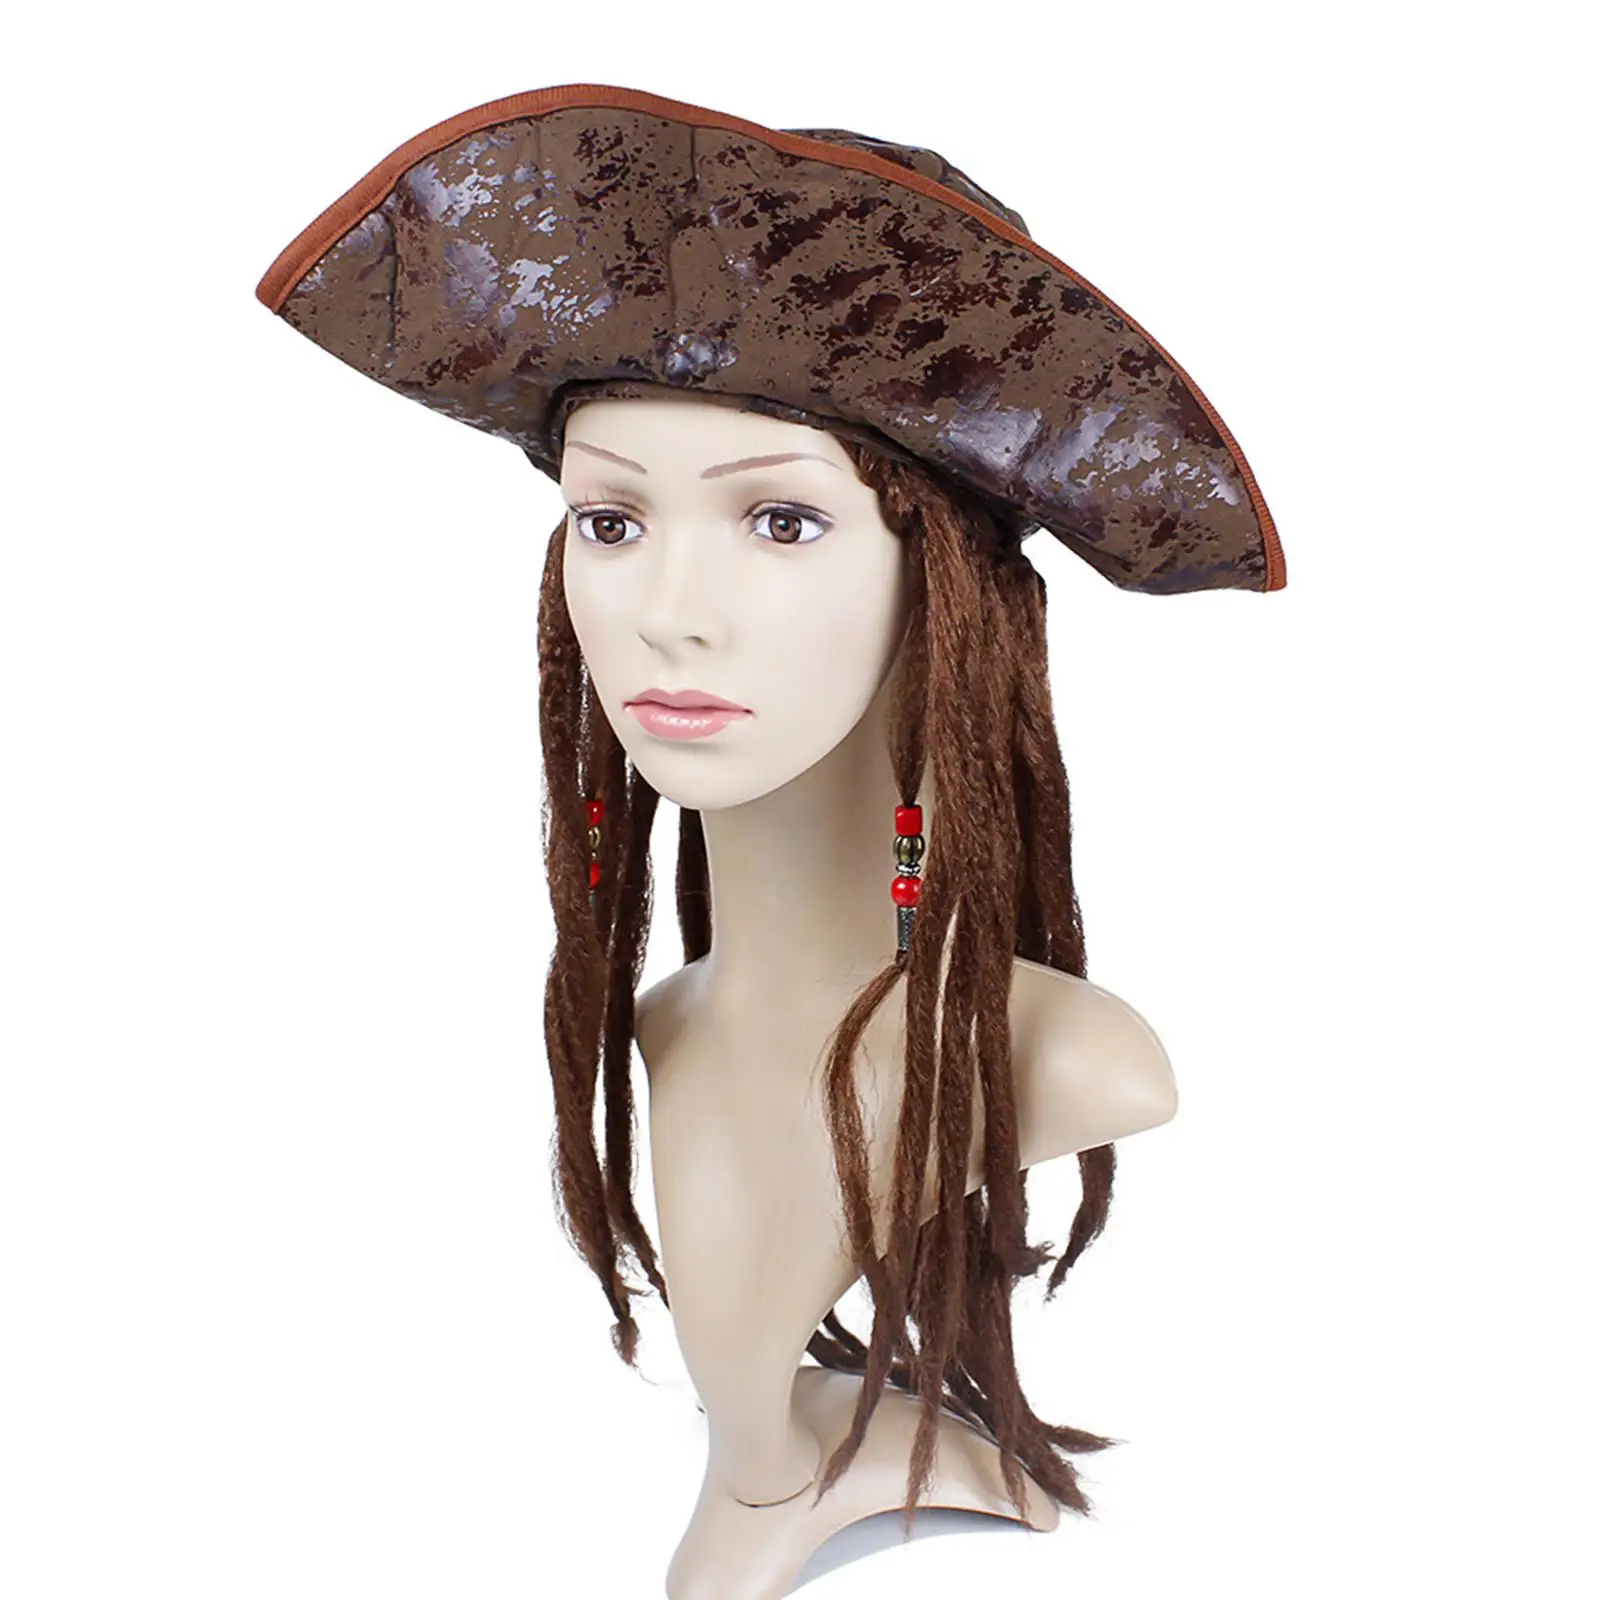 Pirate Hat dress up Accessory with wig captains Costume Caps for Fancy Dress Events Children Adults